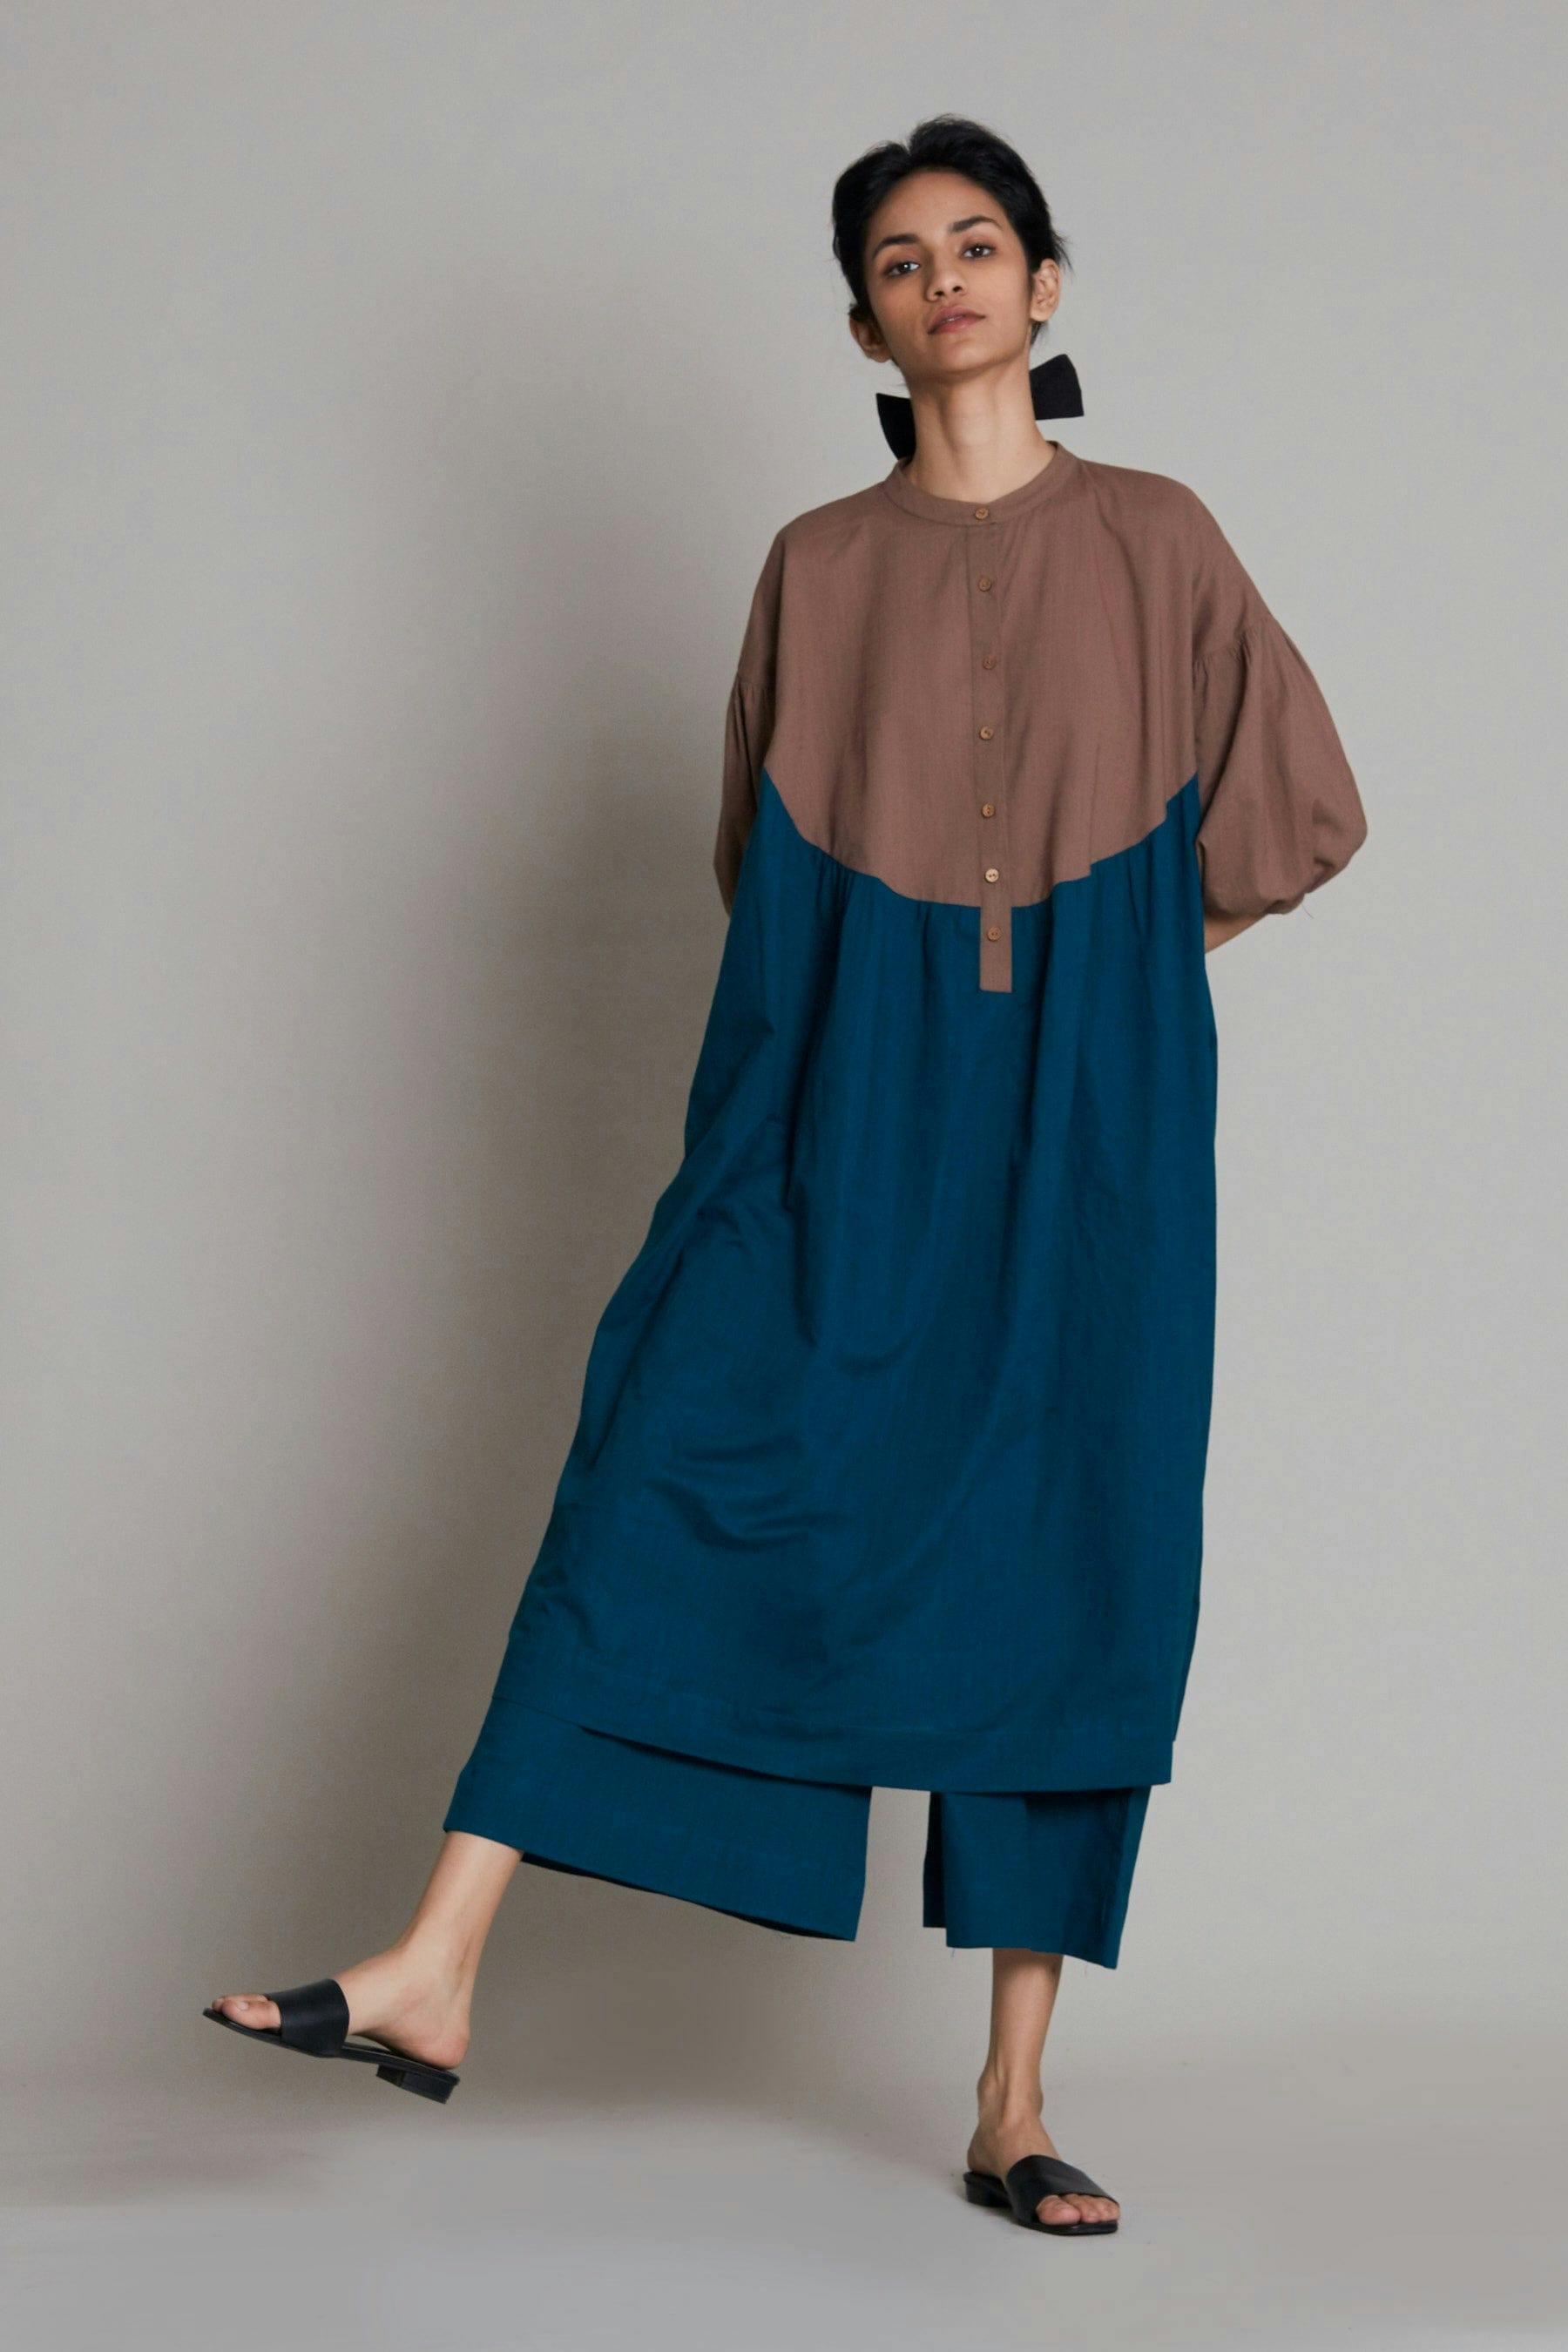 Thumbnail preview #4 for Beige & Teal Blue CB Acra Tunic Set